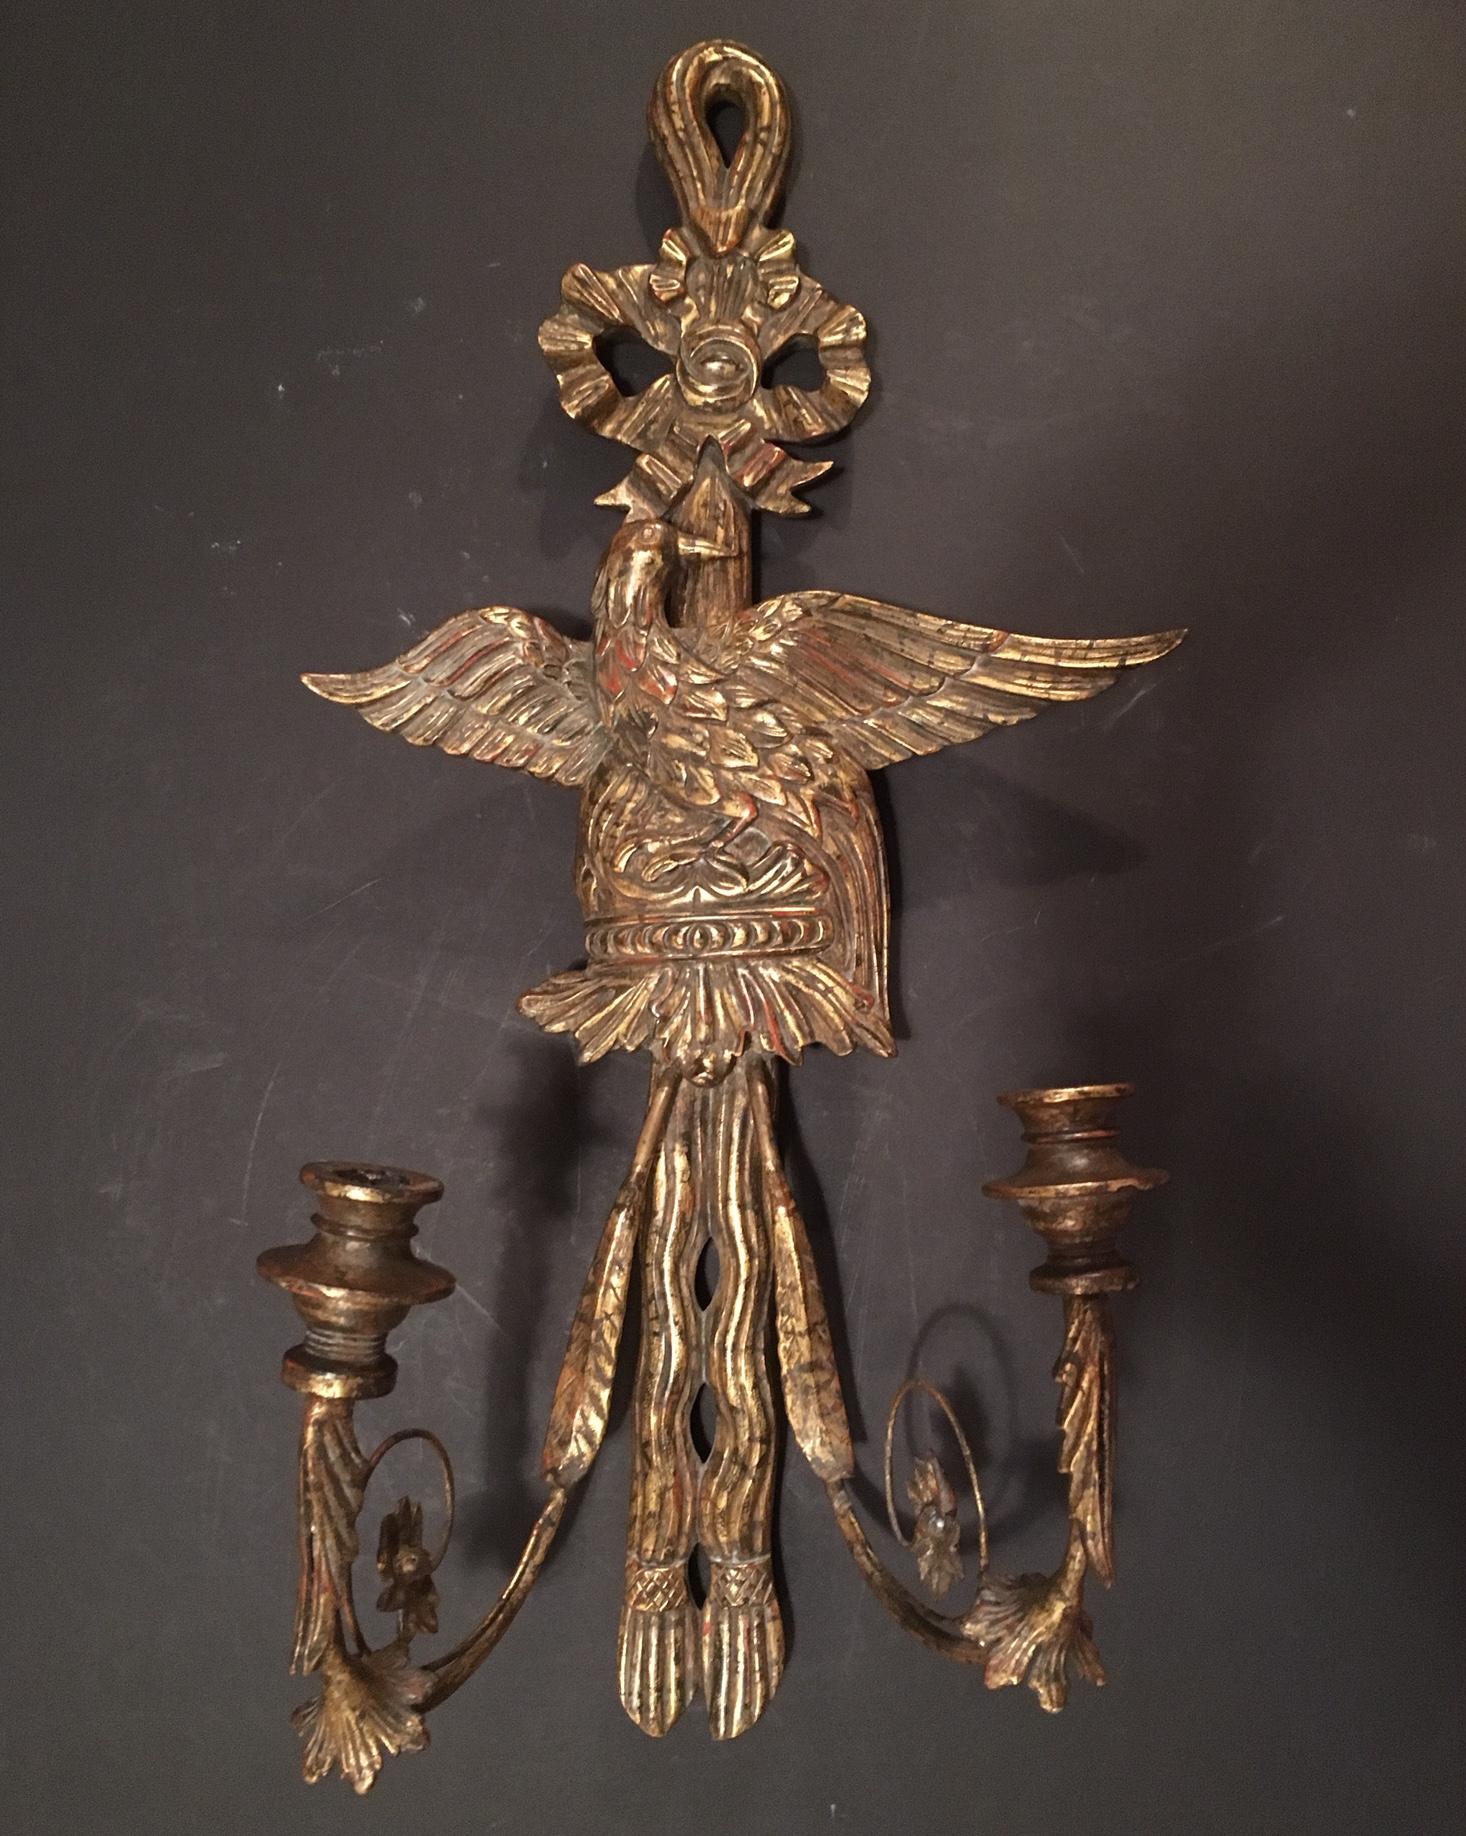 This wood carved and gold gilded antique sconce features a majestic eagle with spread wings beneath a tied bow. The candle arms are of patinated scrolled brass and very finely detailed with acanthus leaves and carved wooden drip pans. The red base